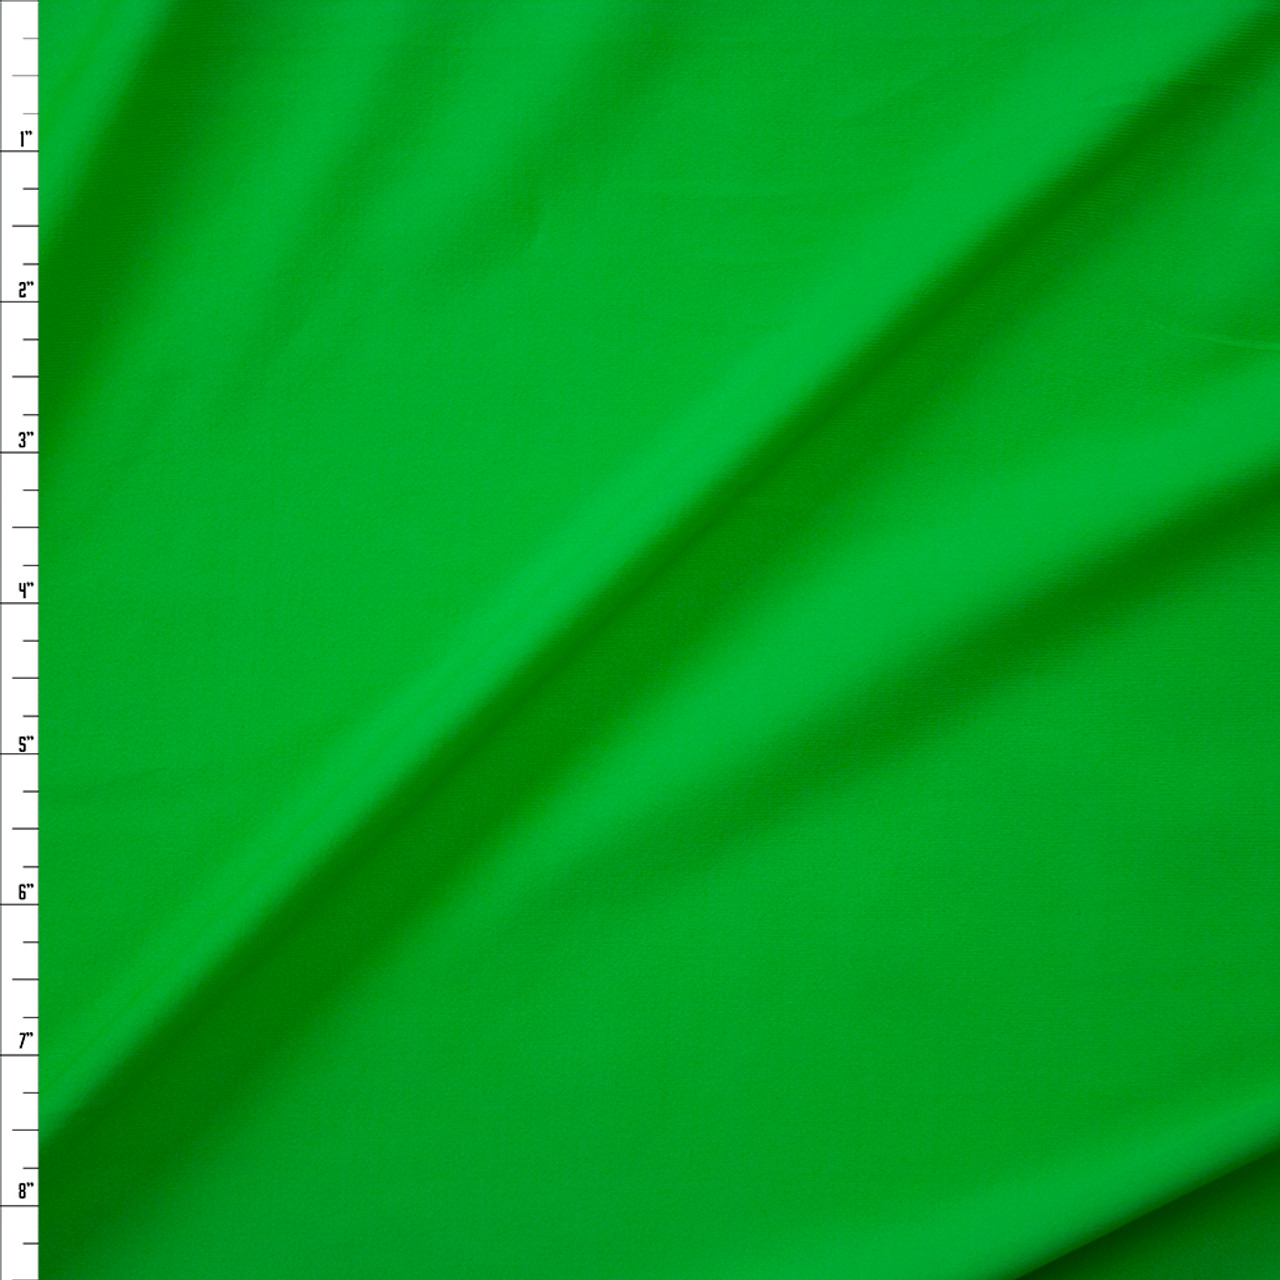 Green Neon Solid Venezia Polyester Spandex Stretch Fabric by the Yard